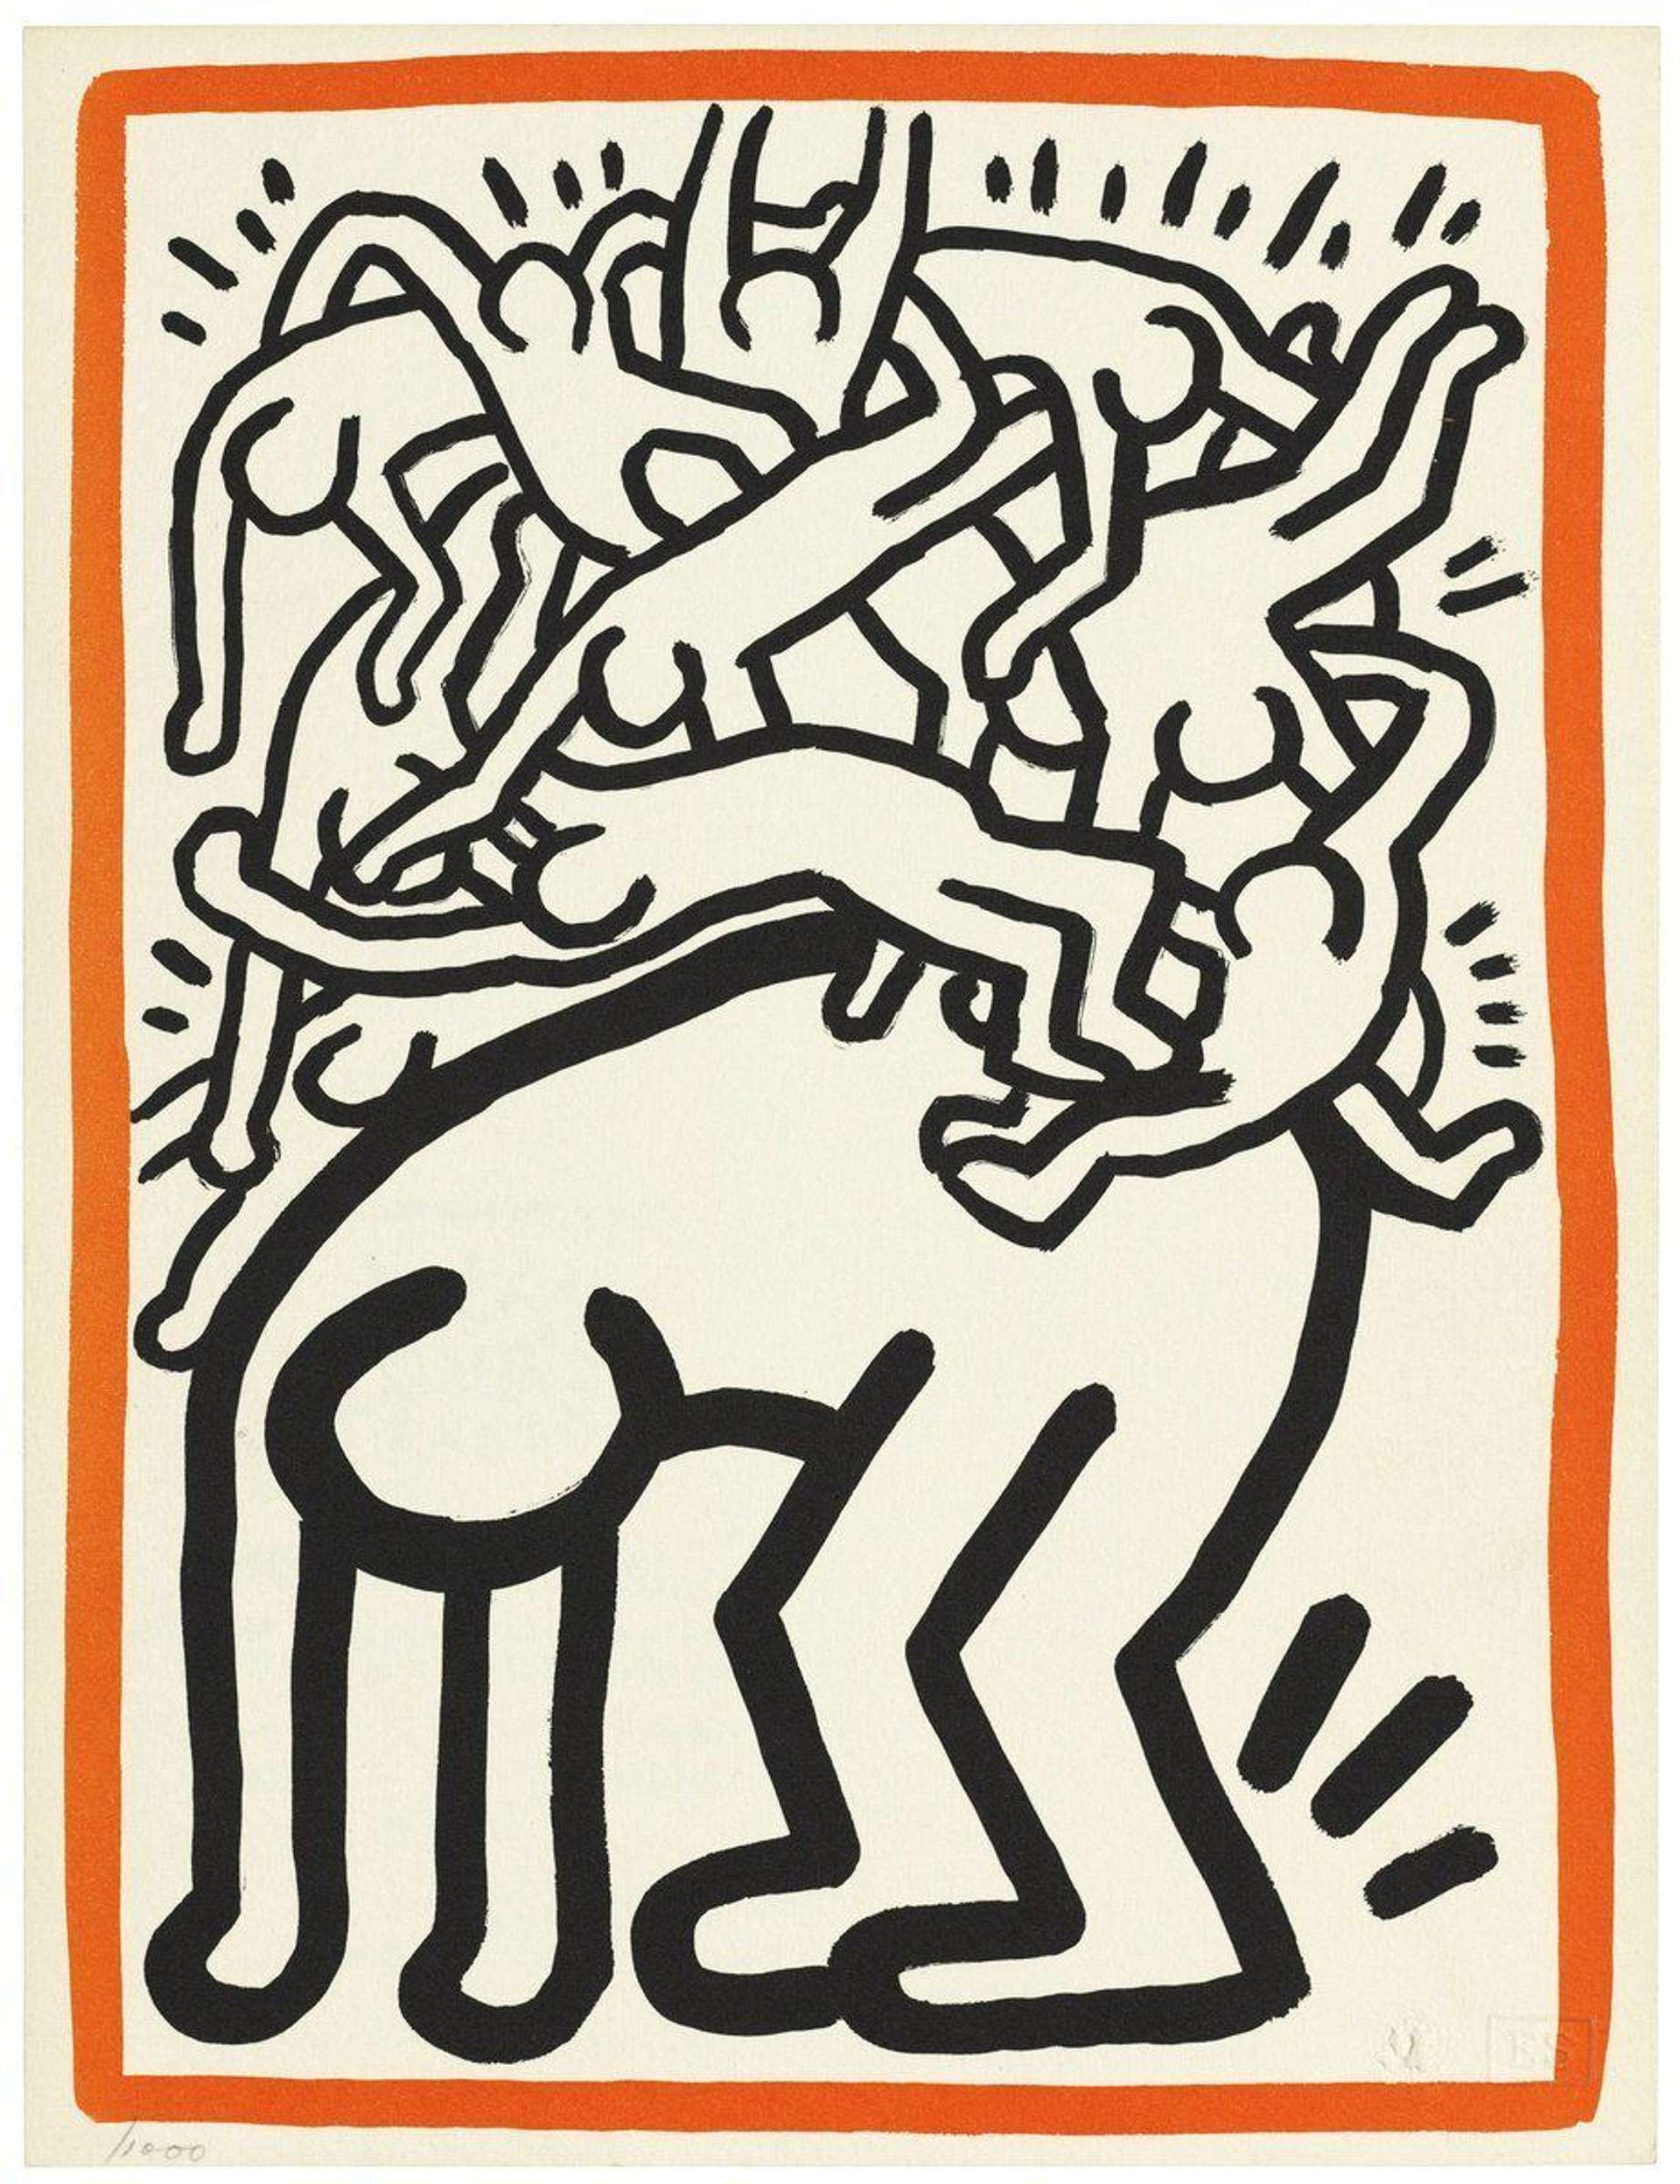 Keith Haring: Fight Aids Worldwide - Signed Print